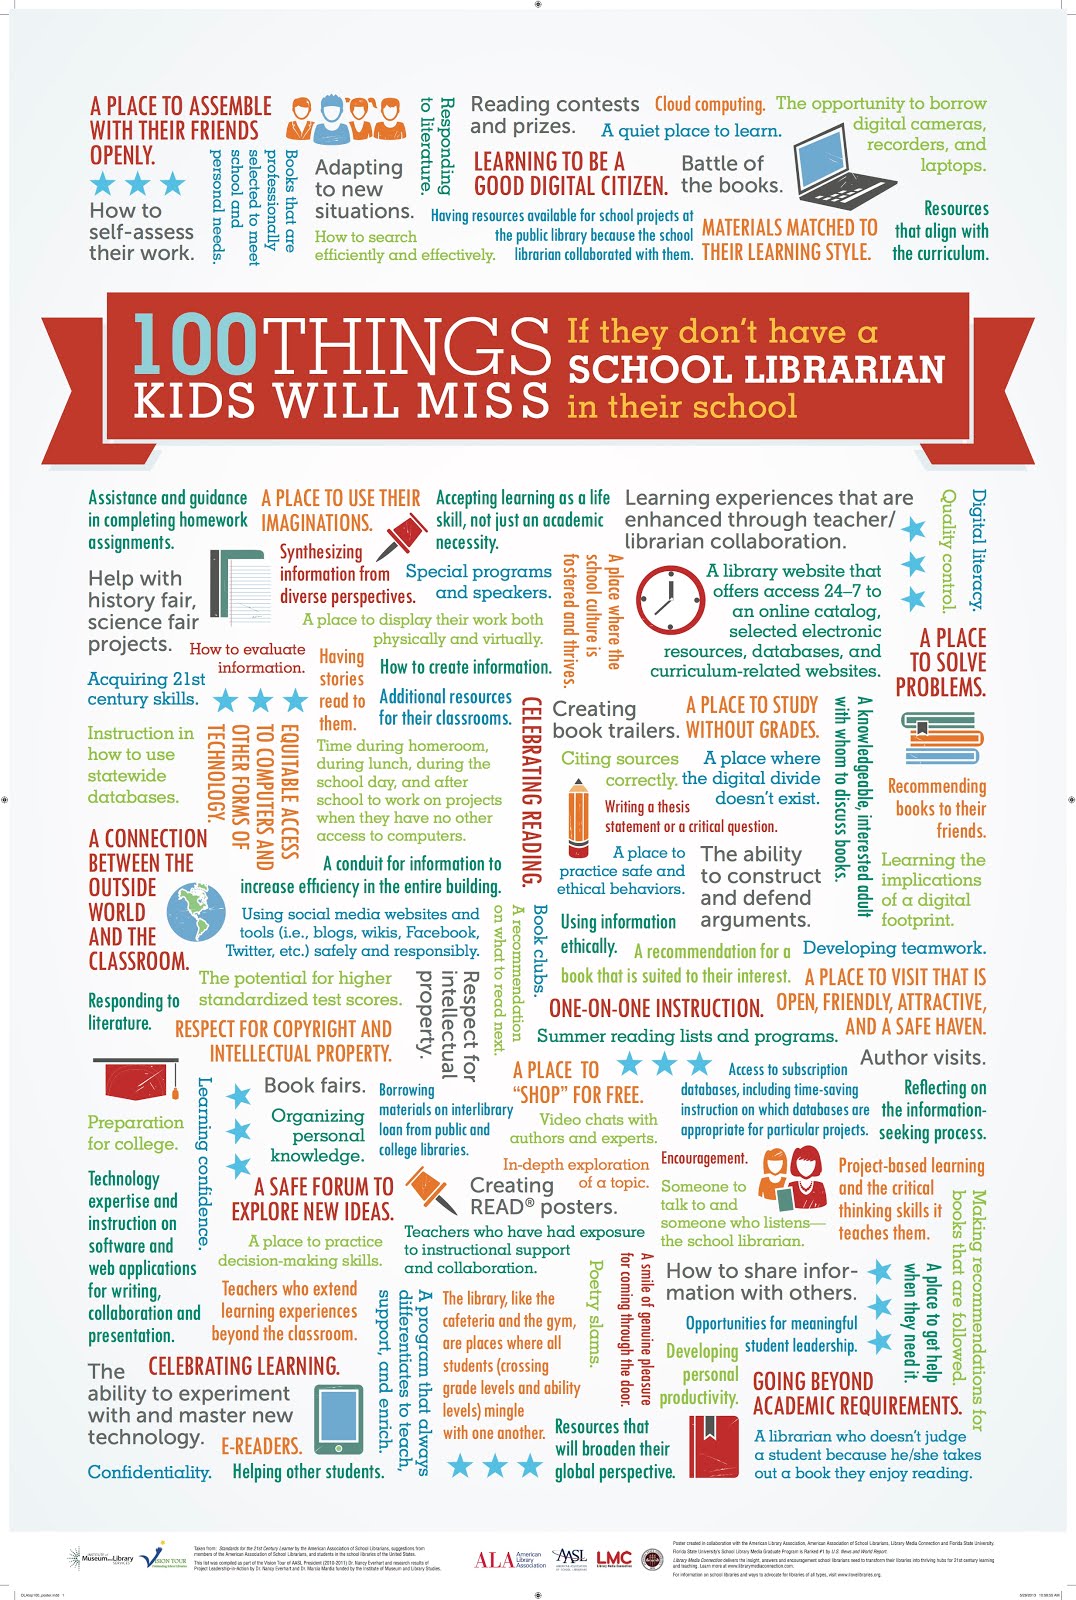 100 Things Poster